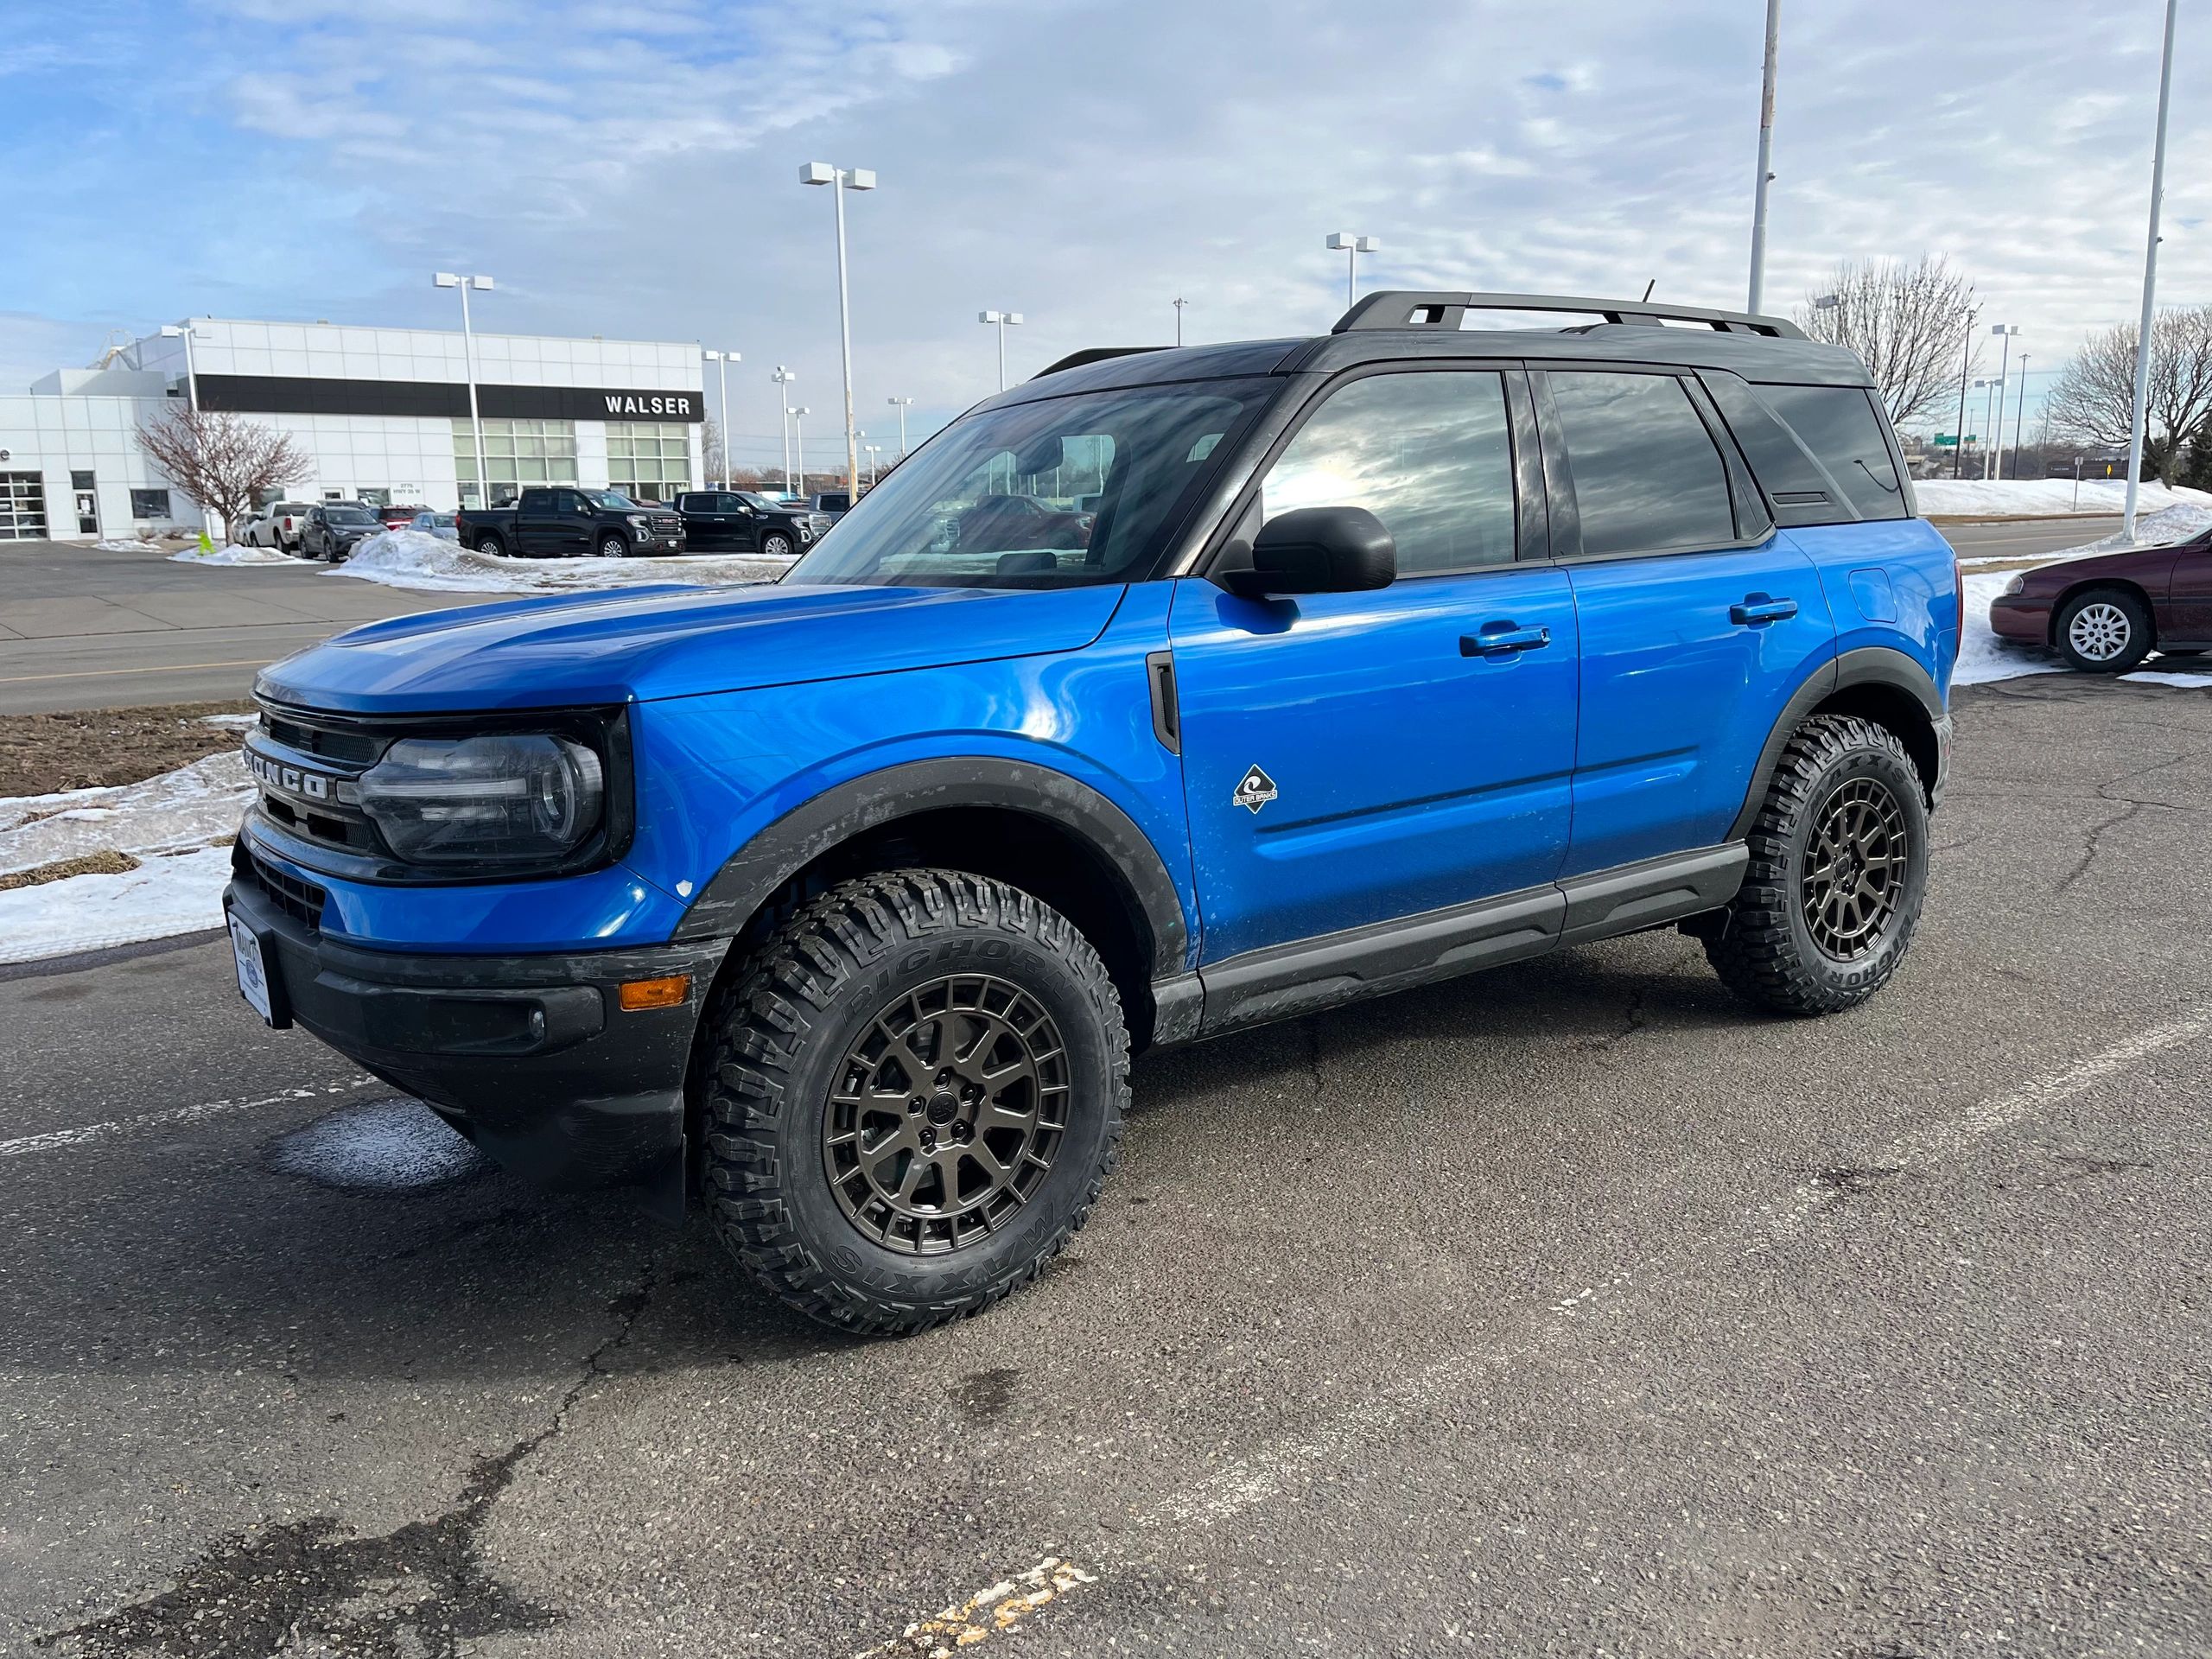 Ford Ranger Lifts